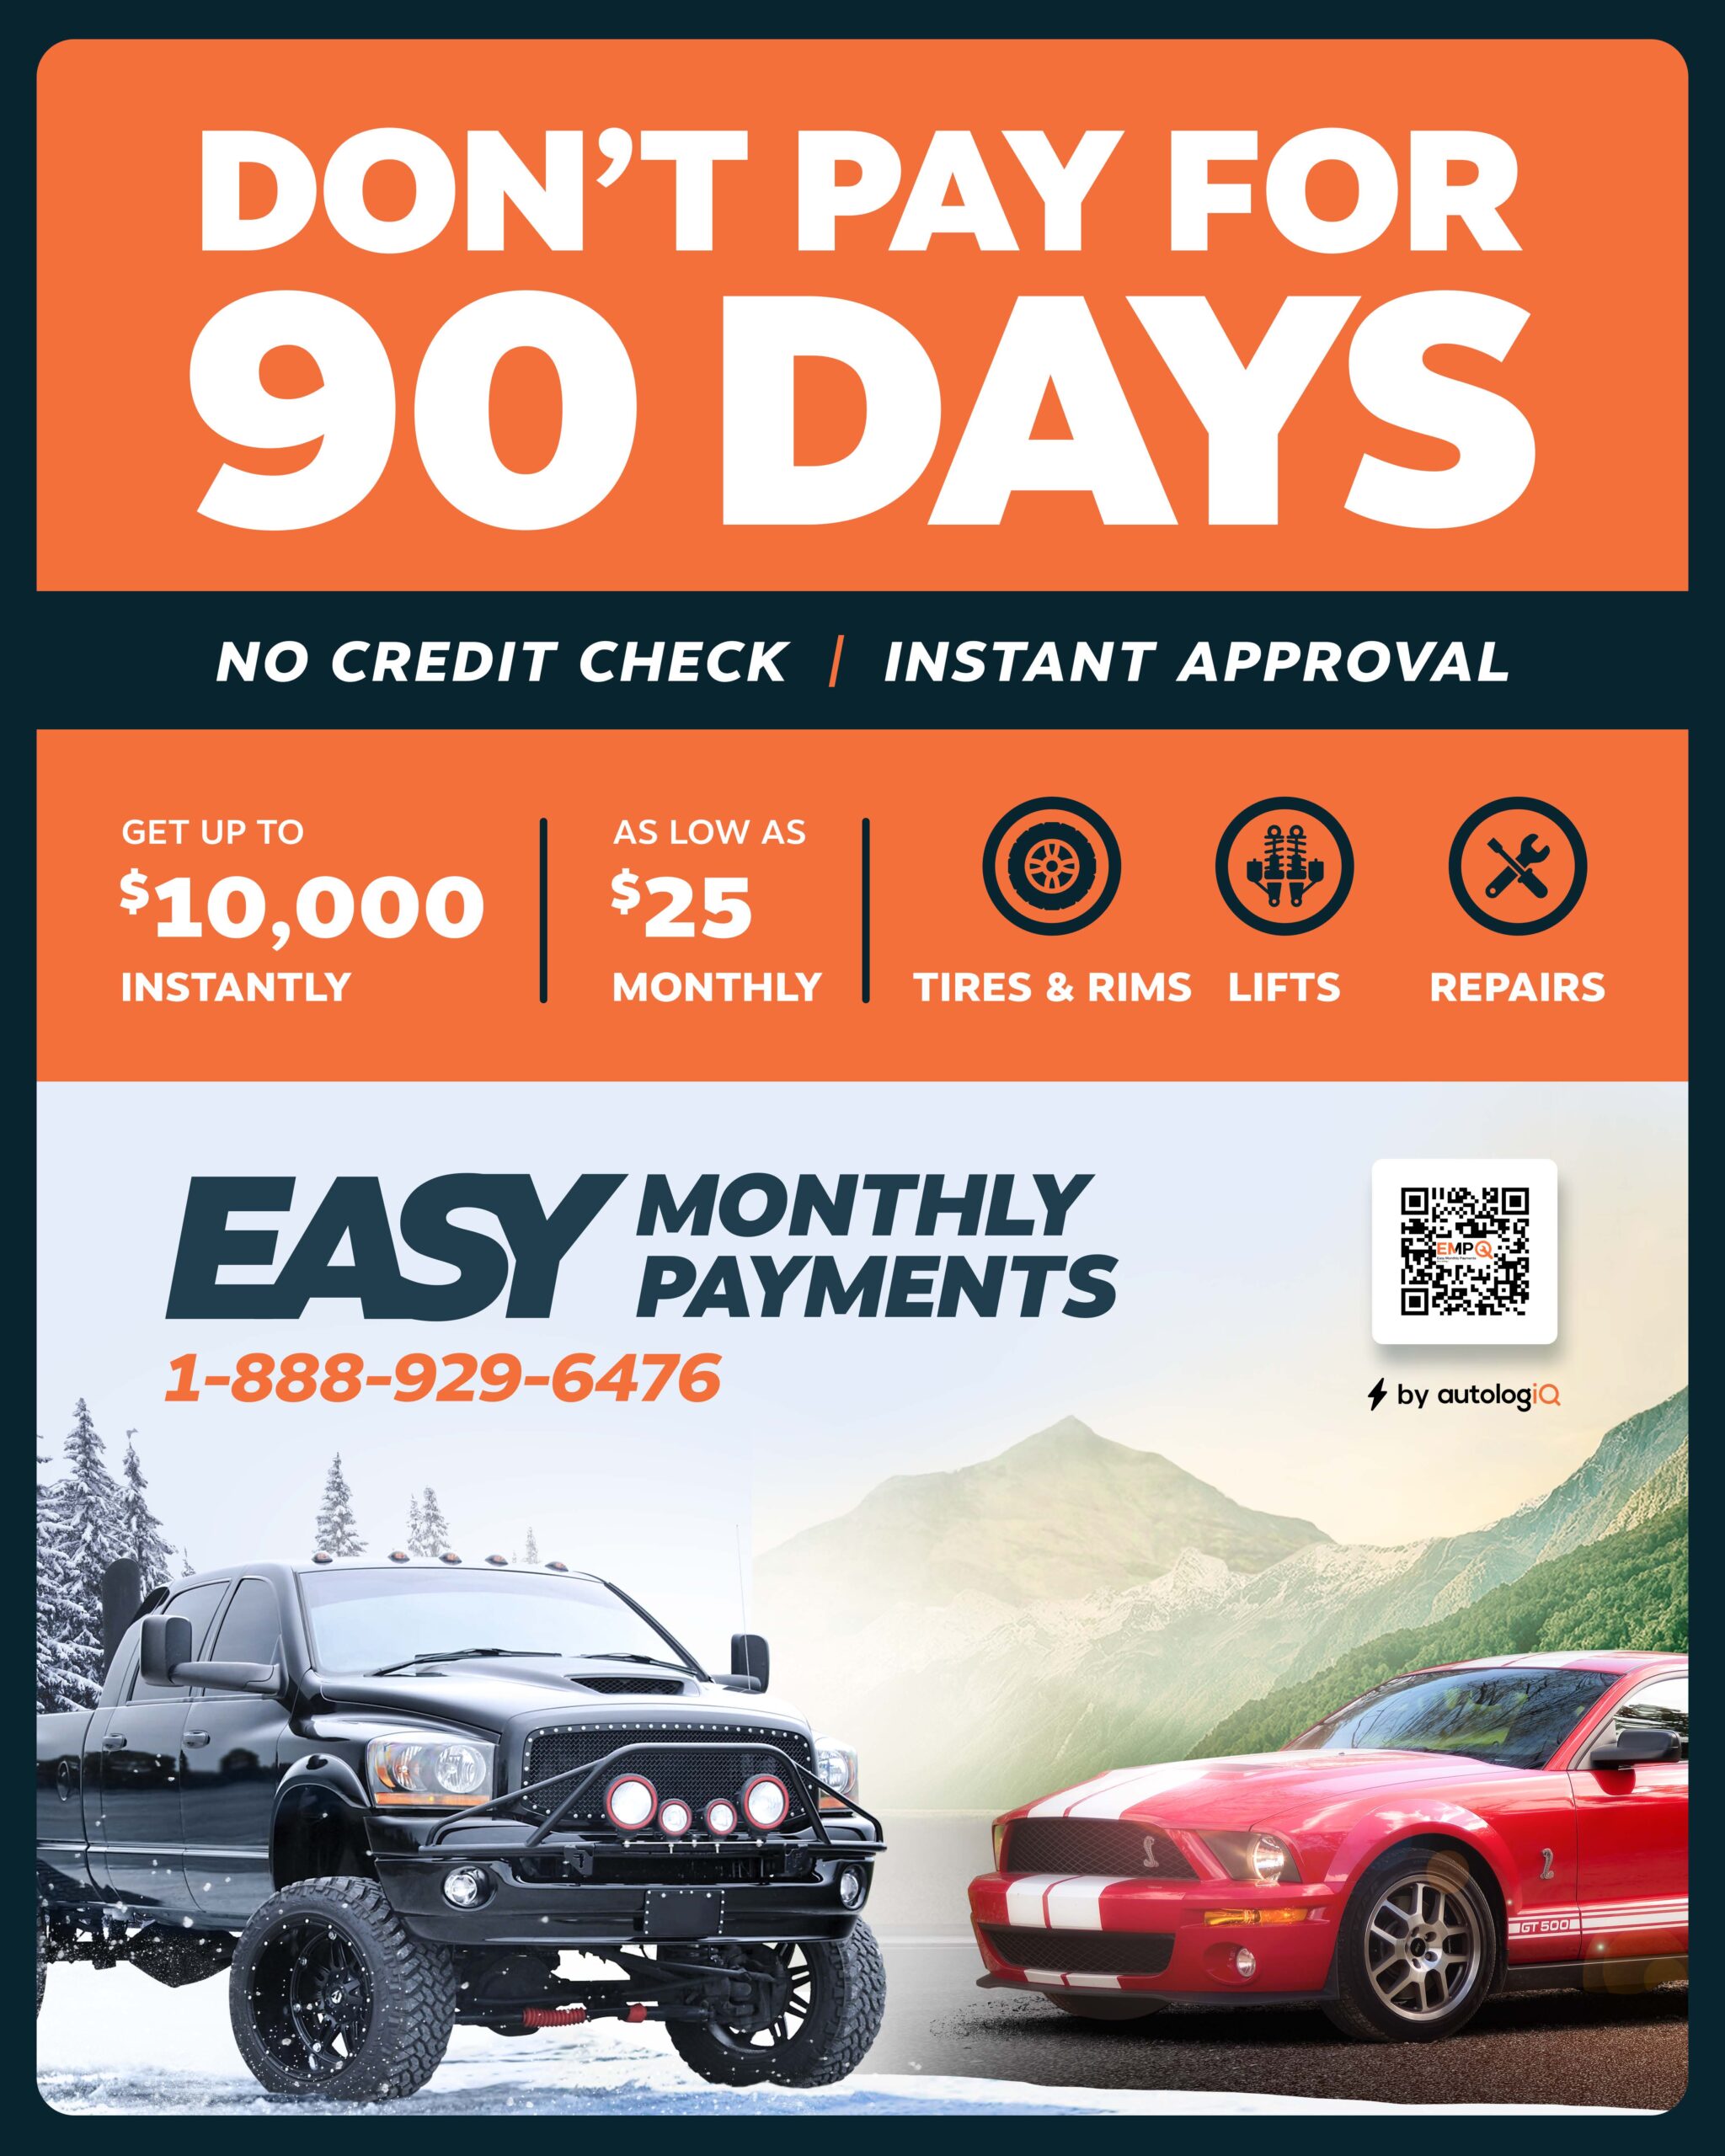 Buy Now Pay Later - Trail Tire Auto Centers